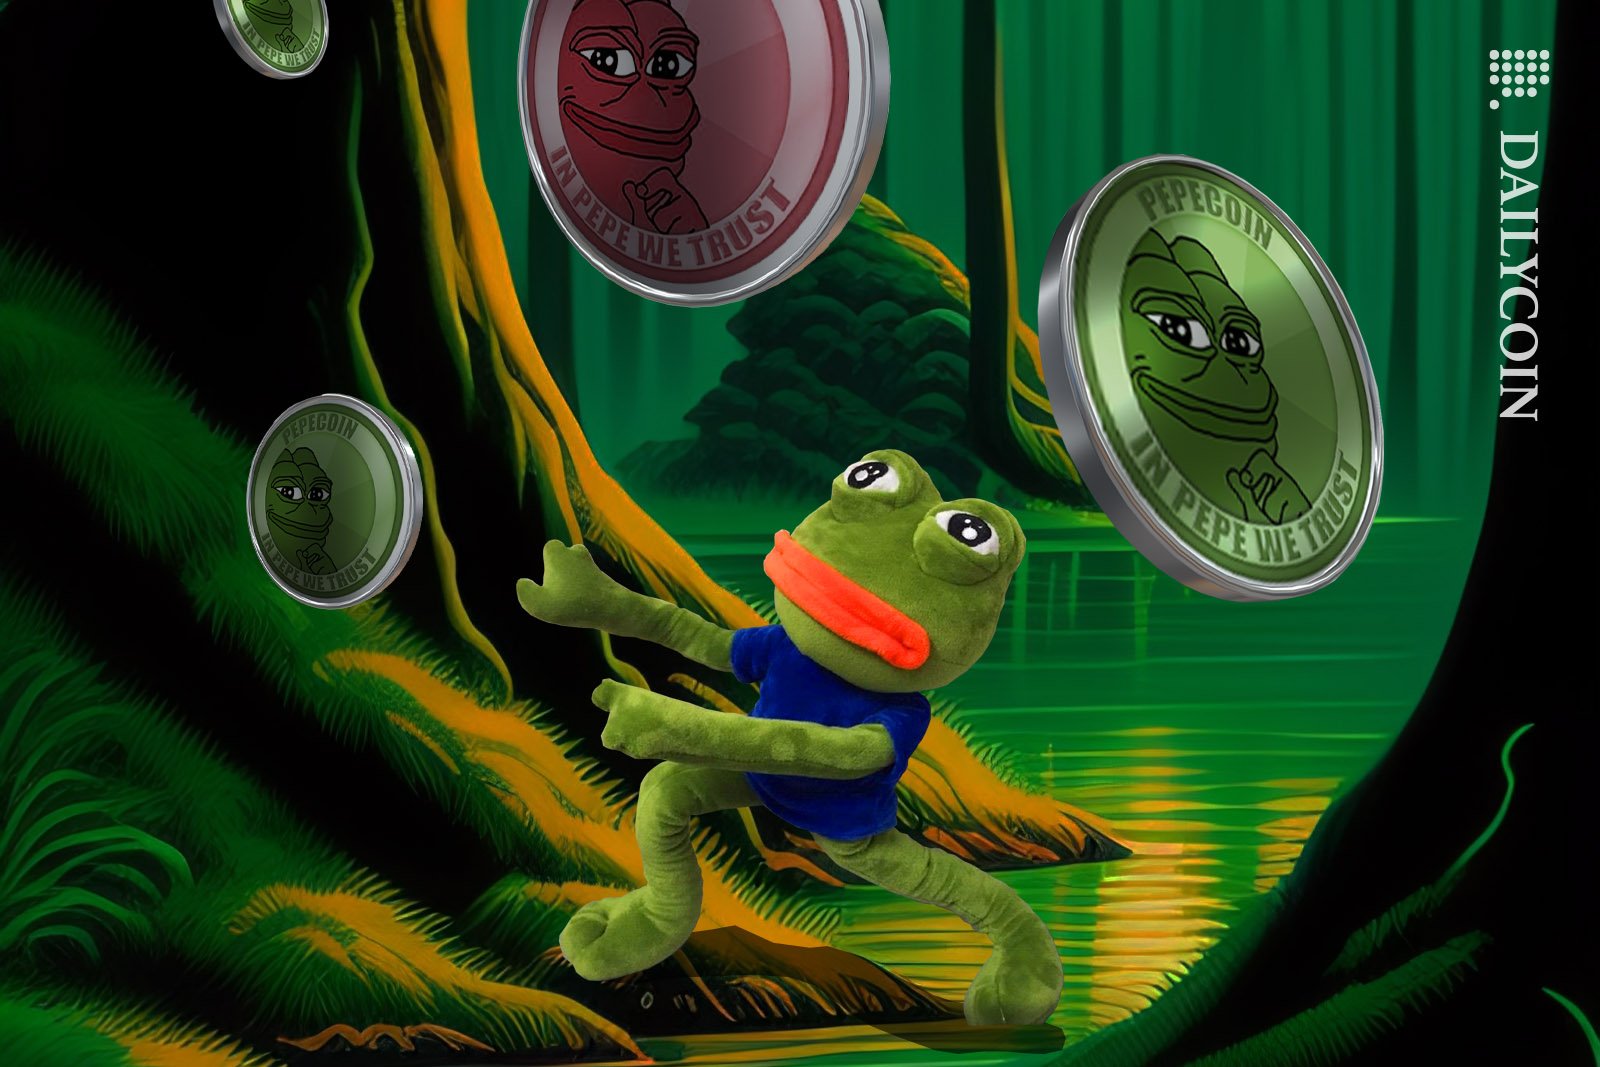 Pepe the Frog sad in a swamp, as Pepe tokens are floating around him.